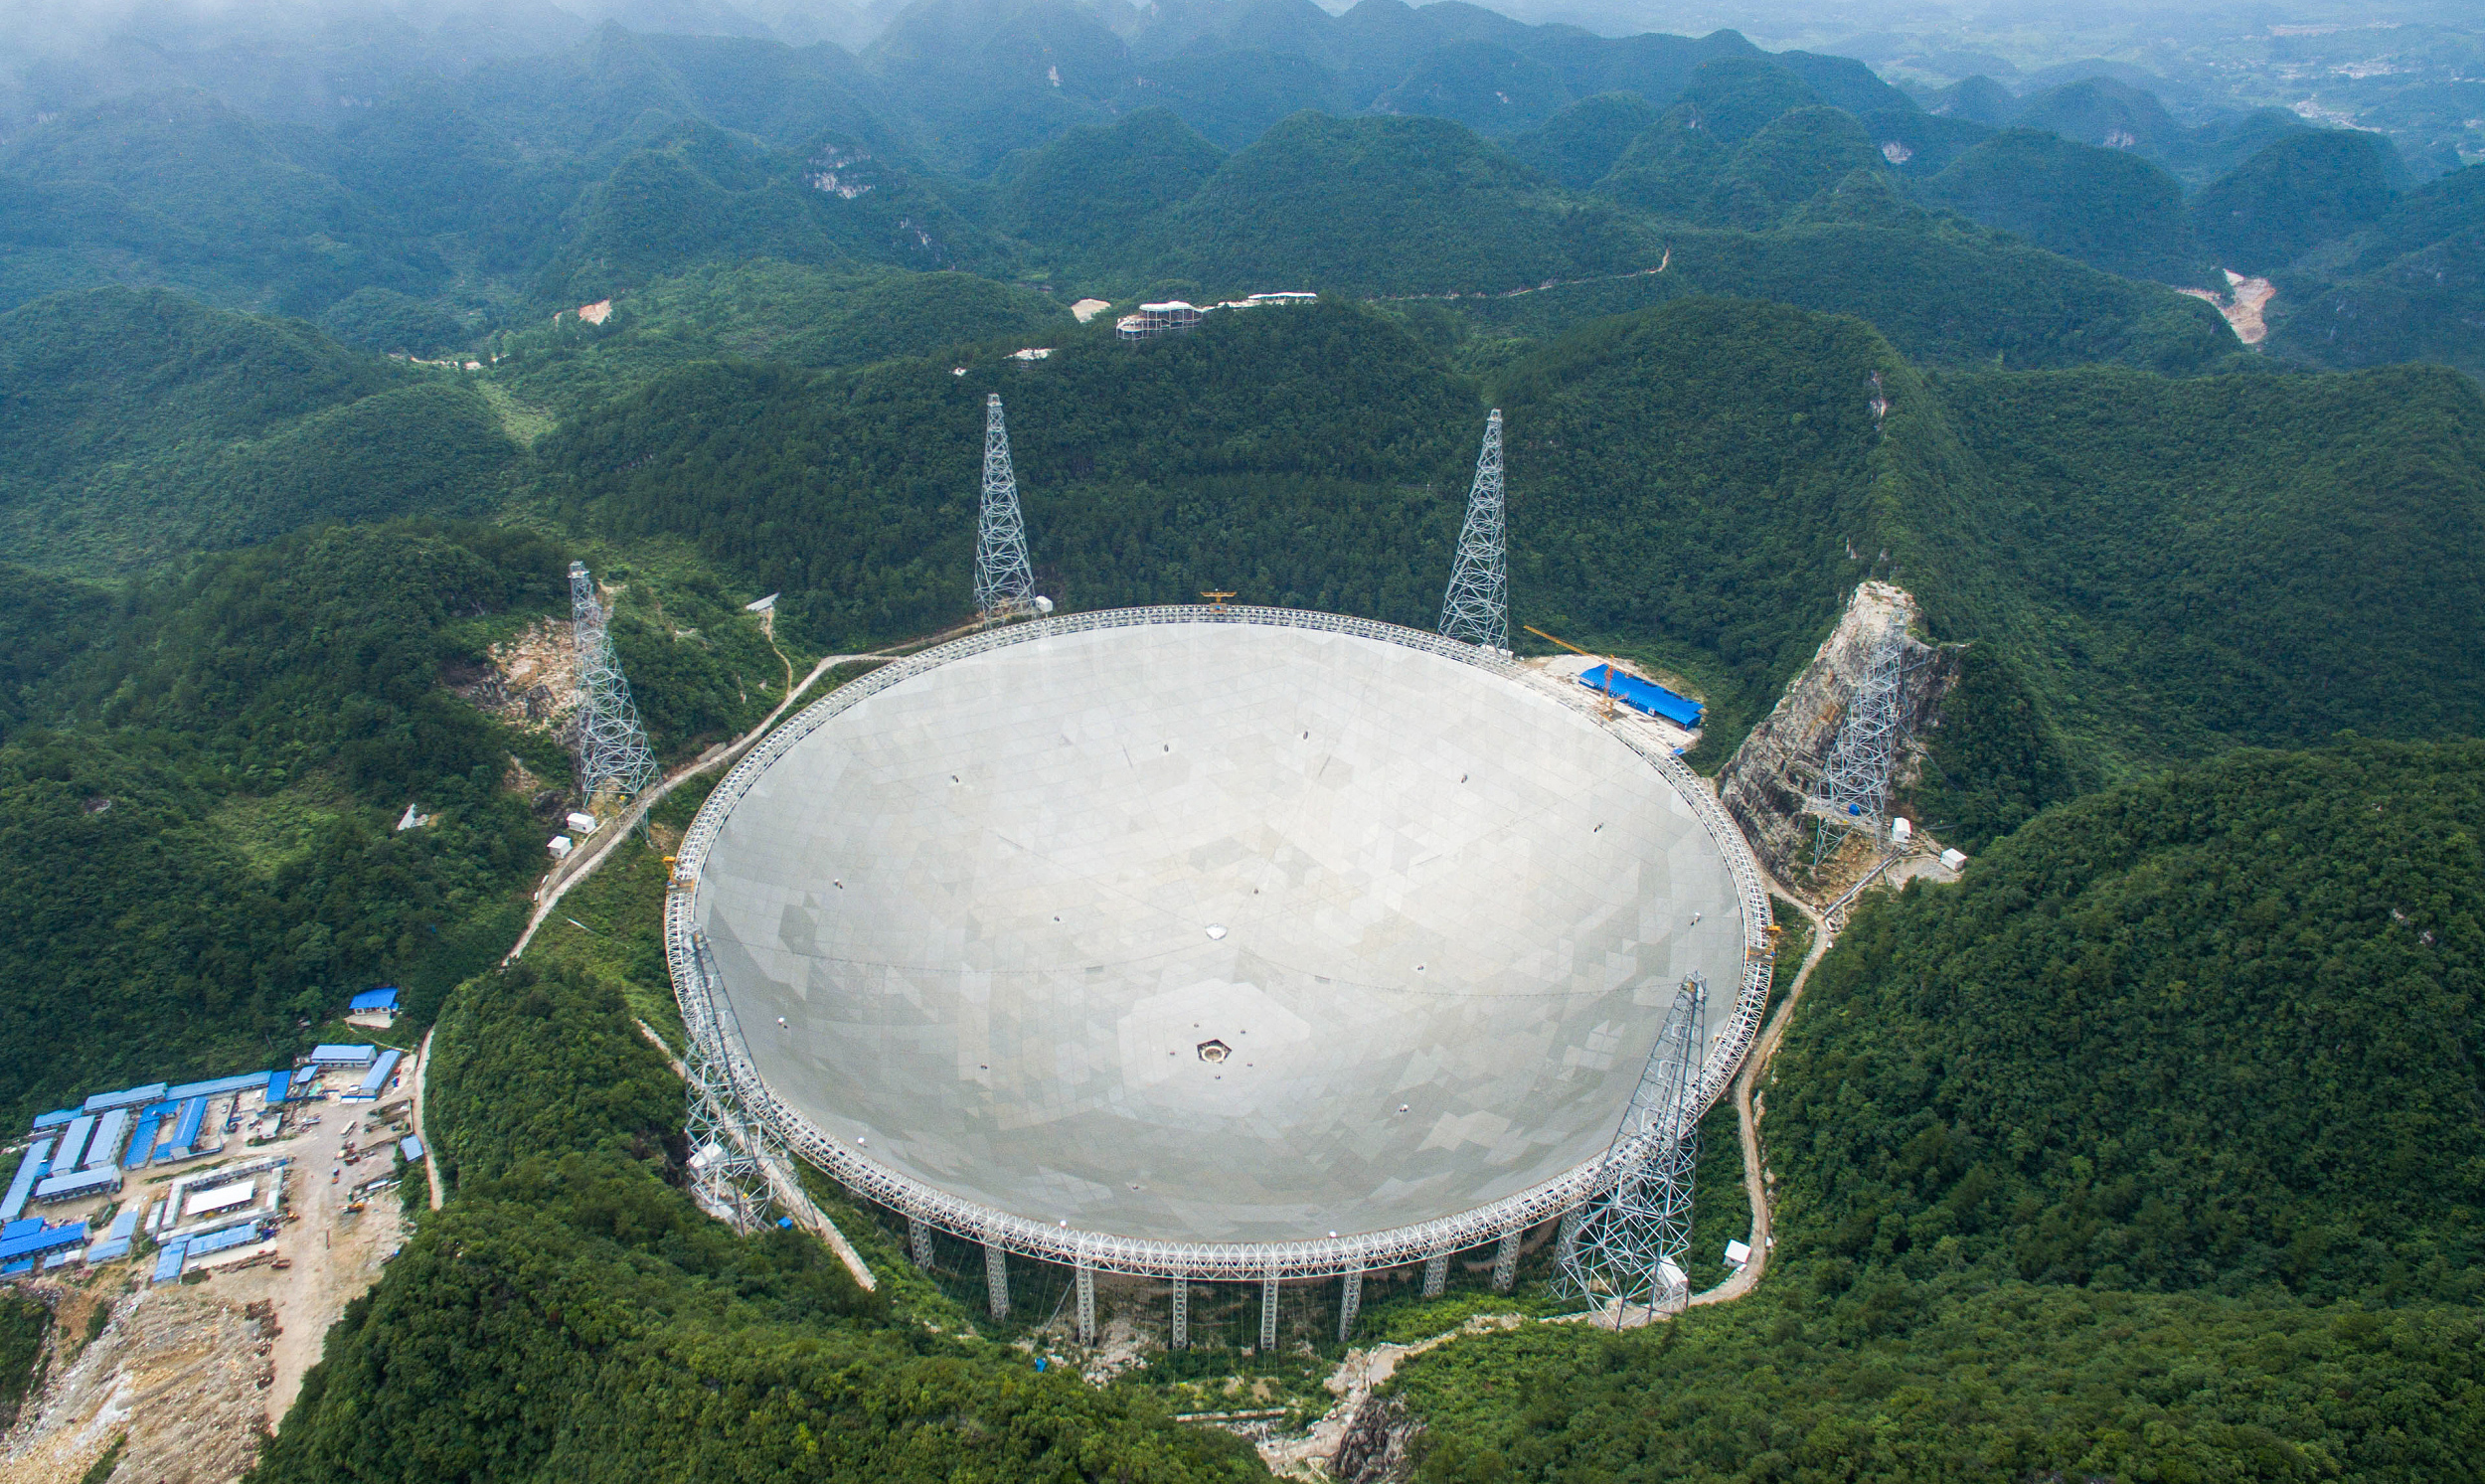 Astronomy Town in Guizhou province